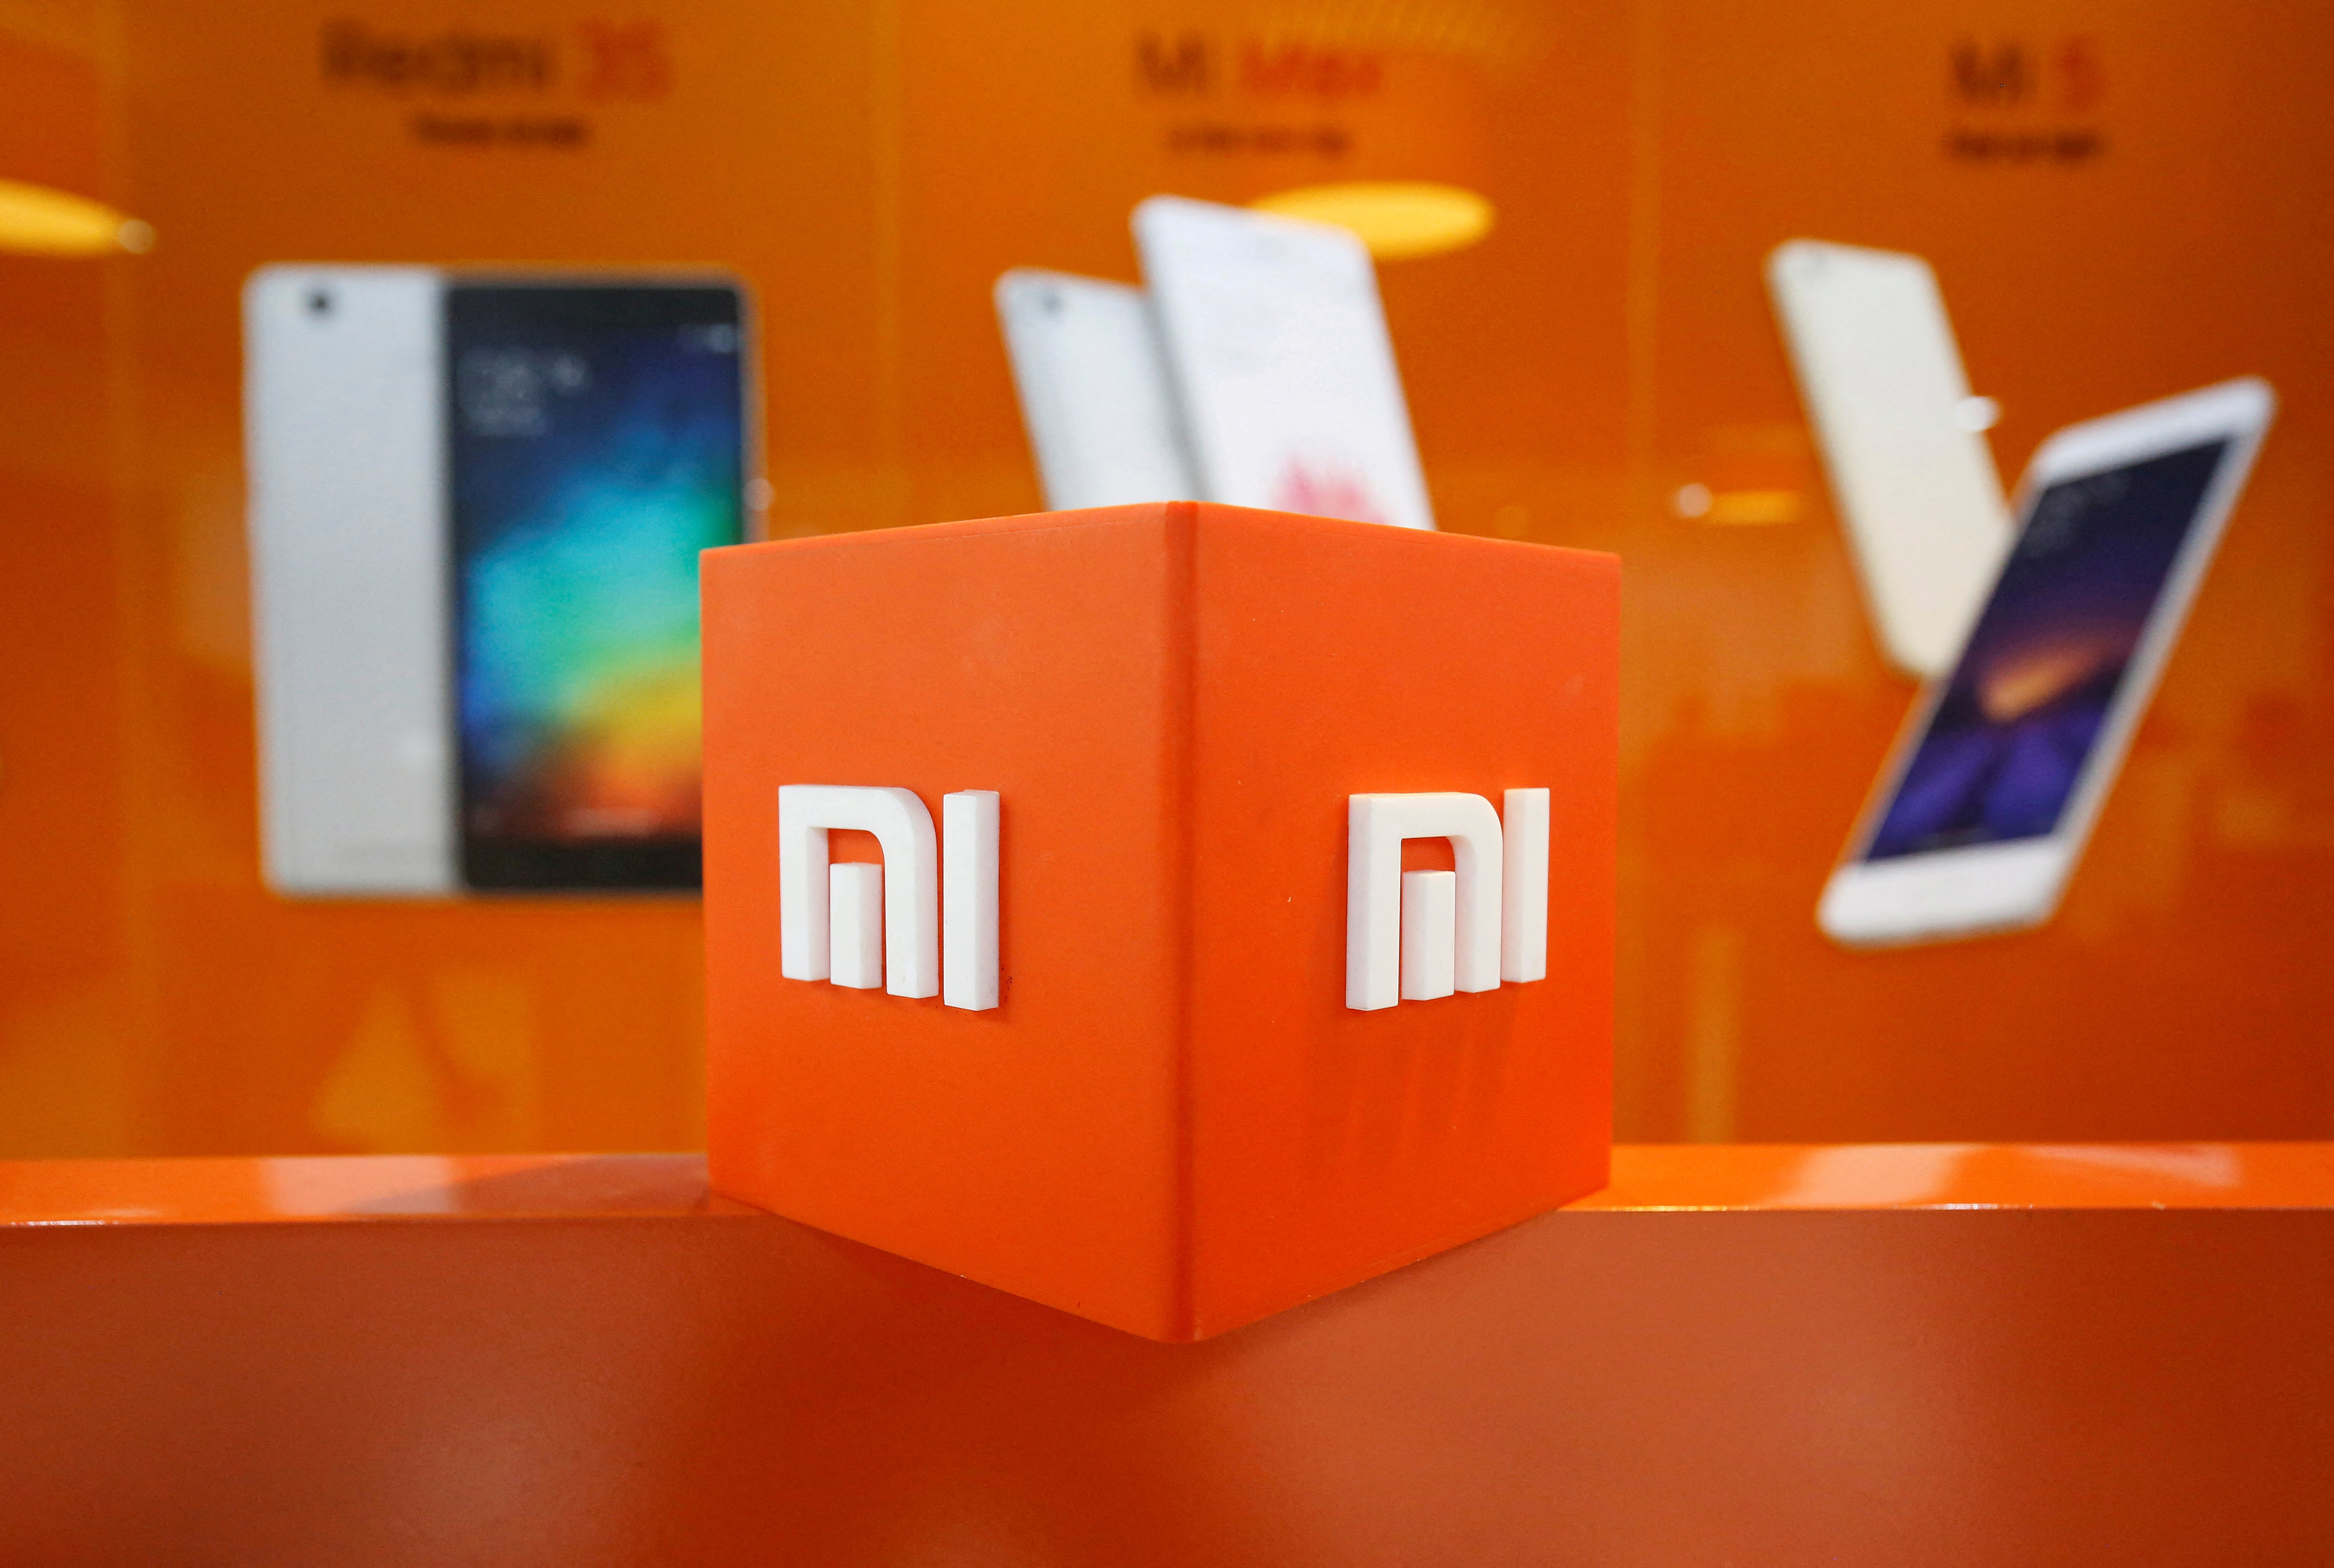 The logo of Xiaomi is seen inside the company's office in Bengaluru